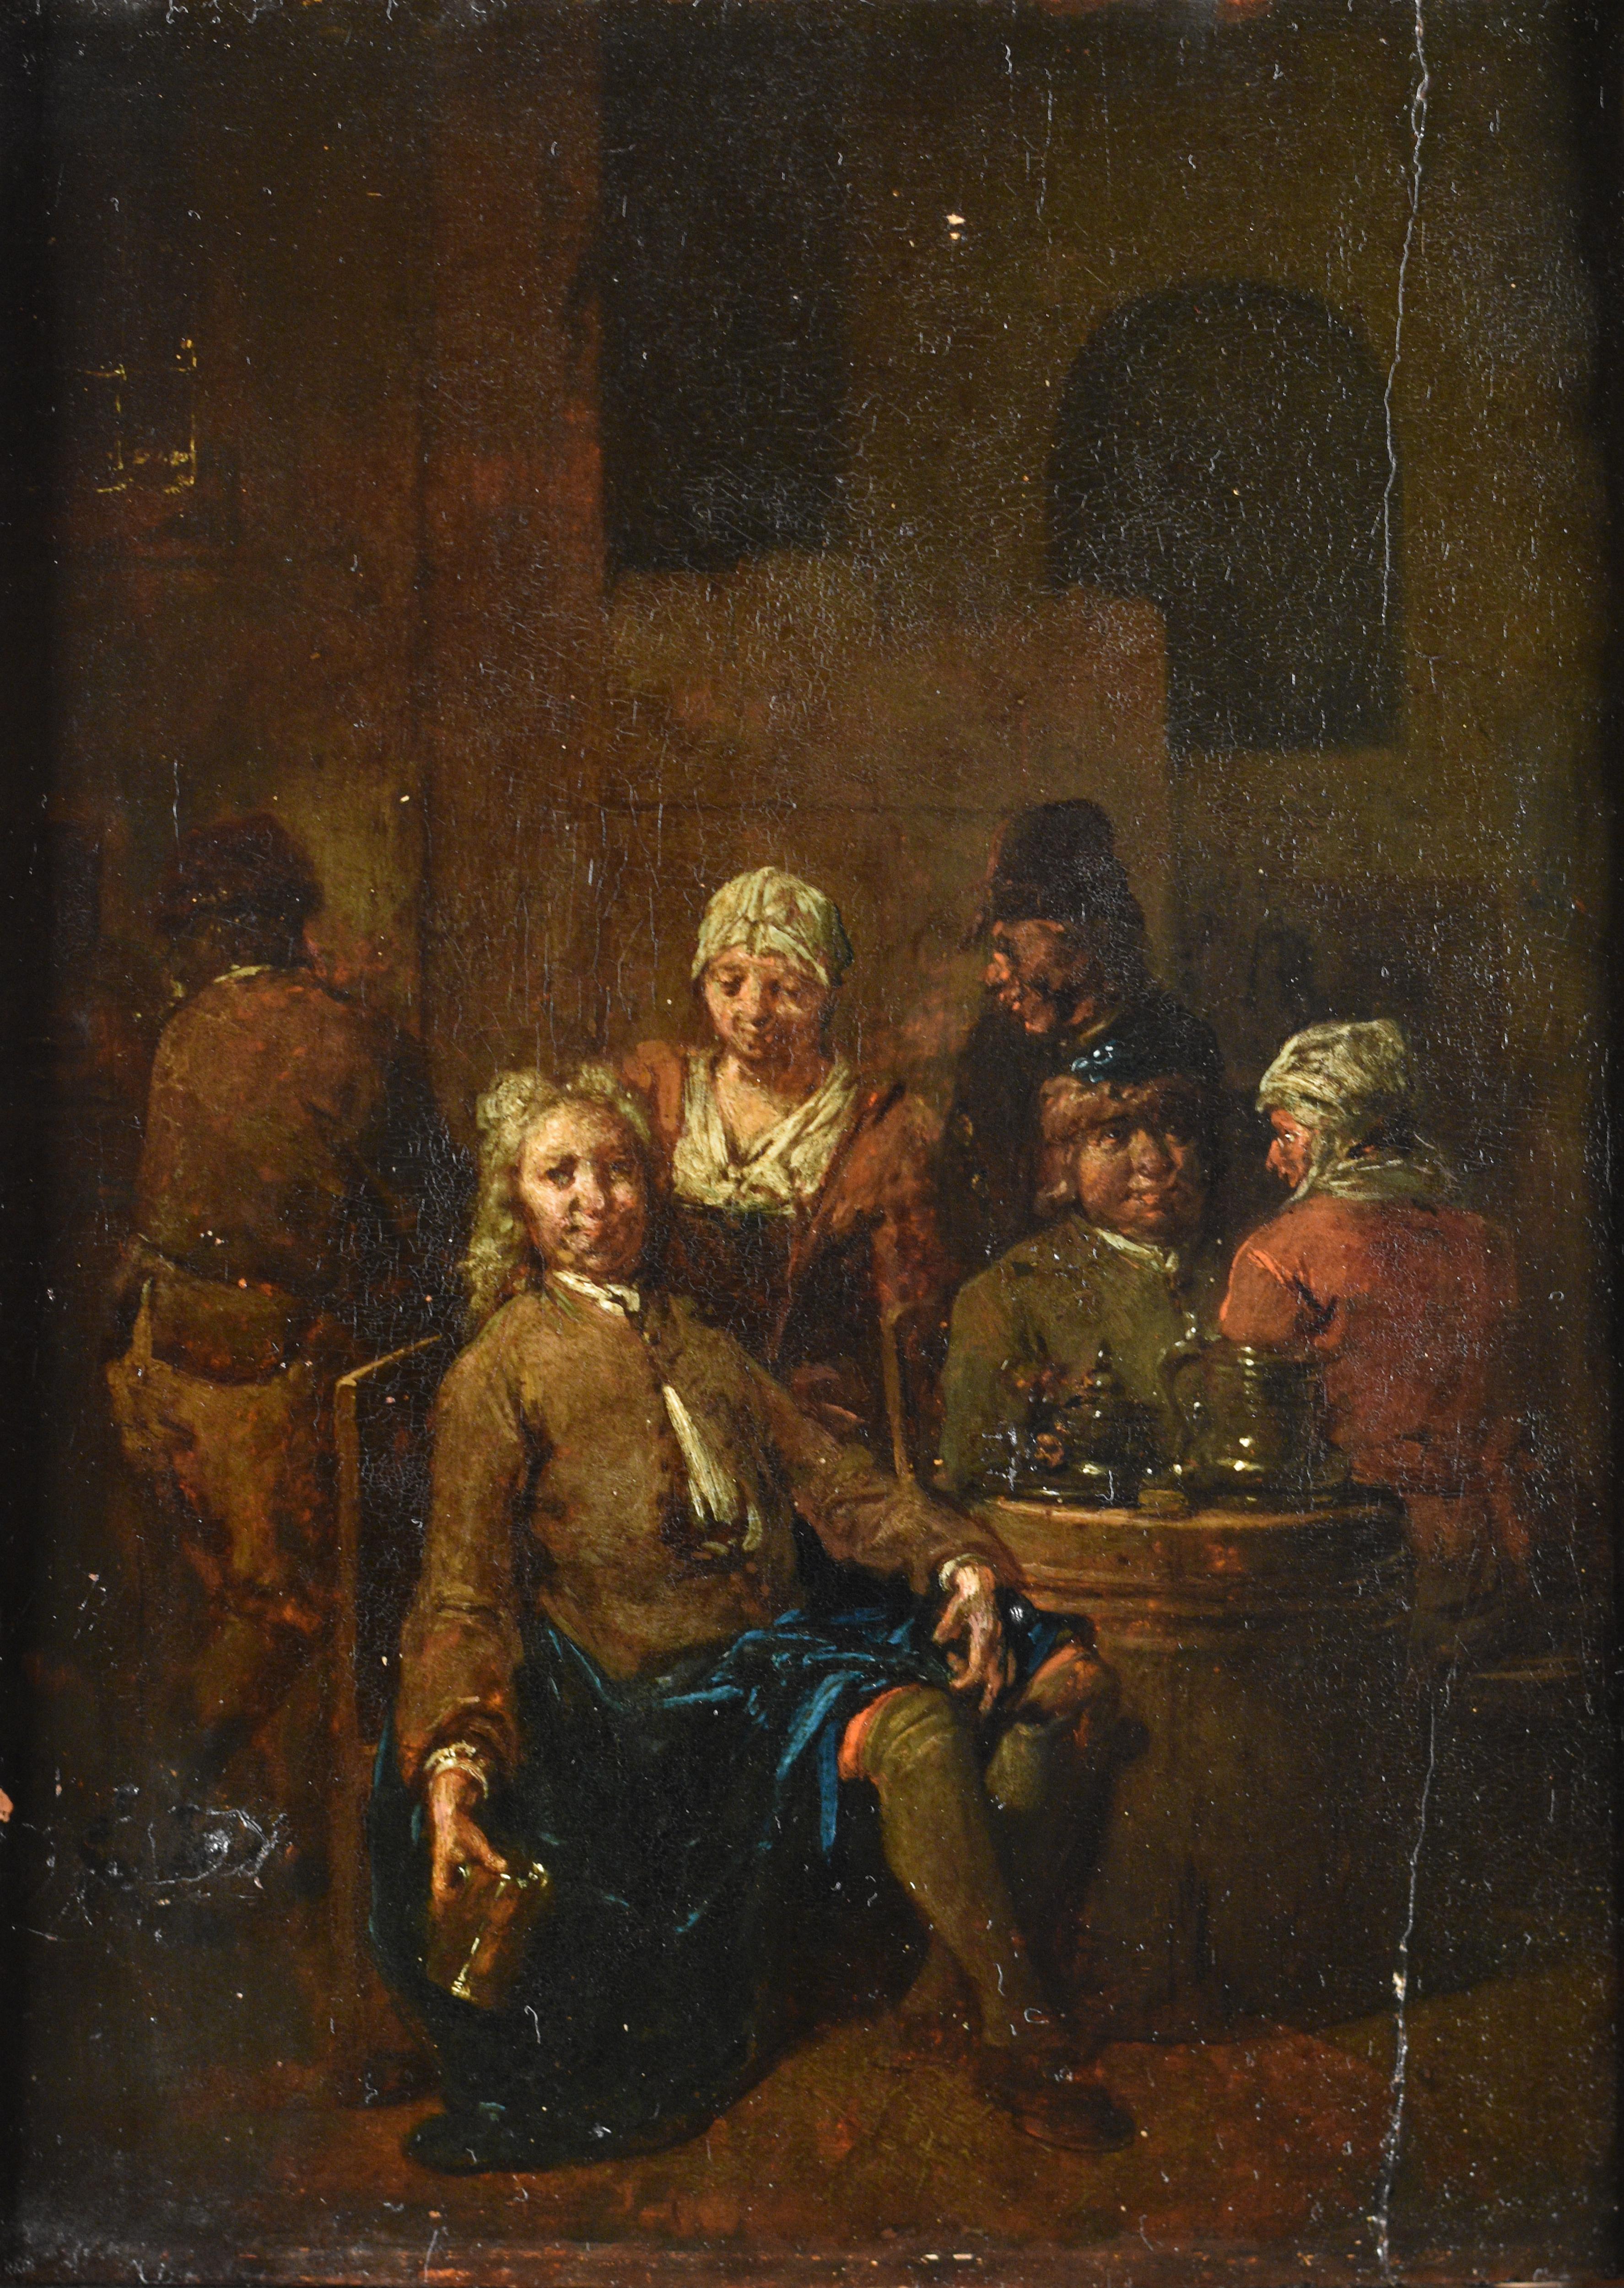 Unknown Interior Painting - 17th Century Dutch School, Peasants in a tavern